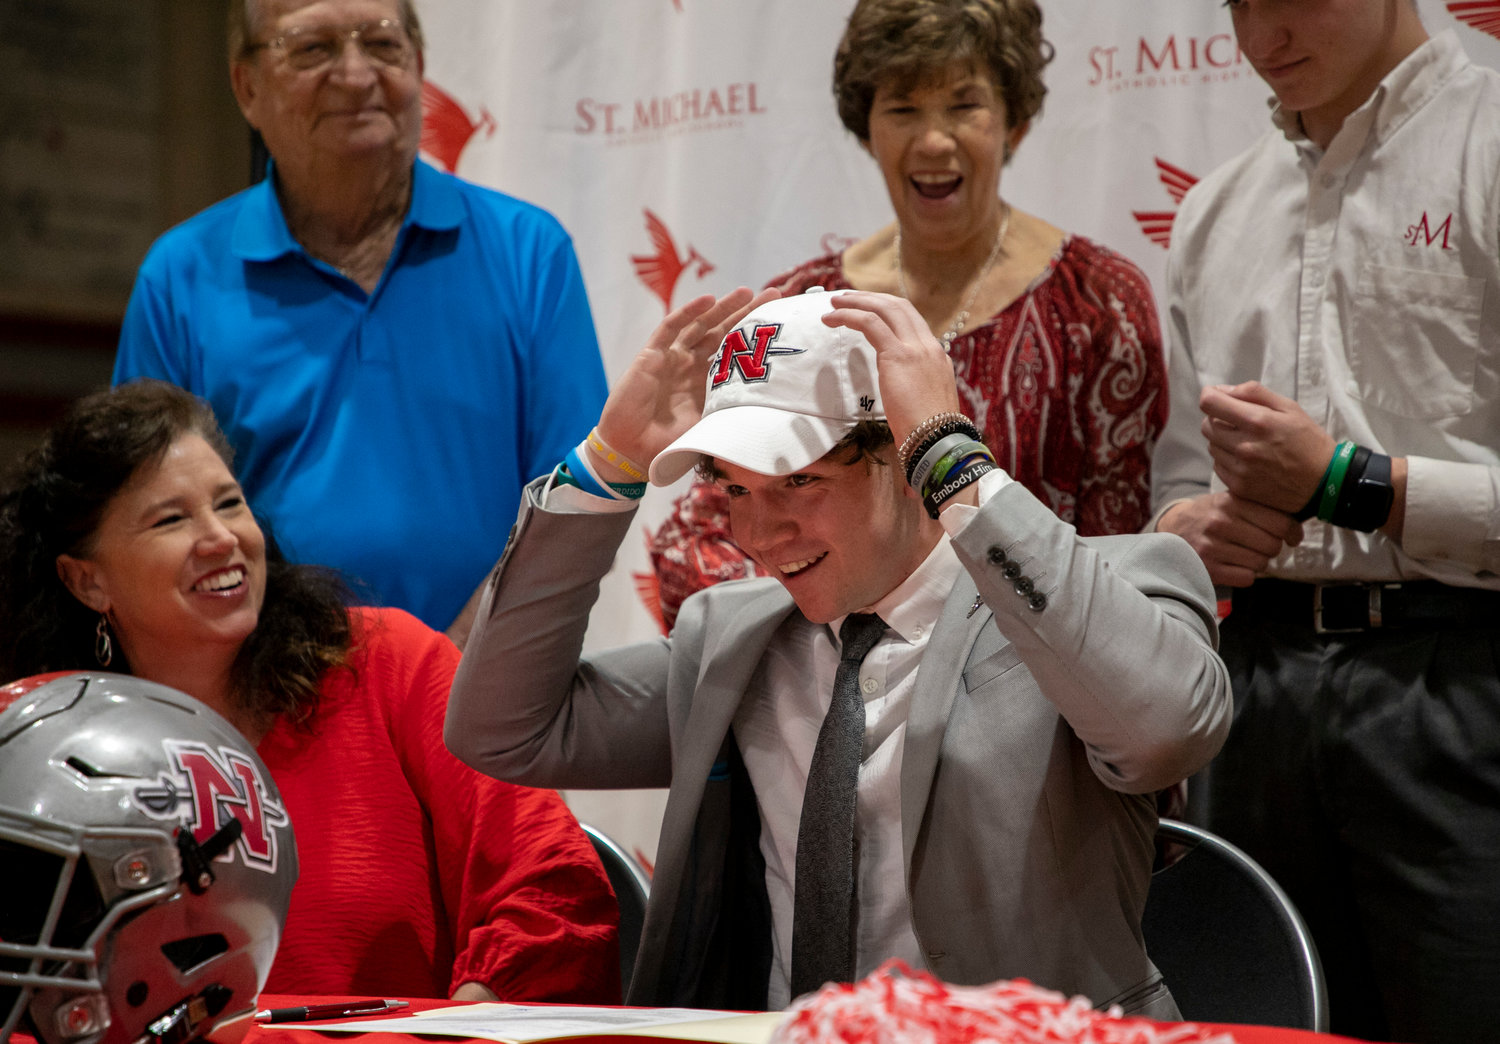 Nicholls State’s newest football signee, Justin Helper, inked his National Letter of Intent Monday, March 27, to join the Colonels after graduating from St. Michael Catholic. The four-year starting safety announced his commitment to the program in Thibodaux, Louisiana March 16.